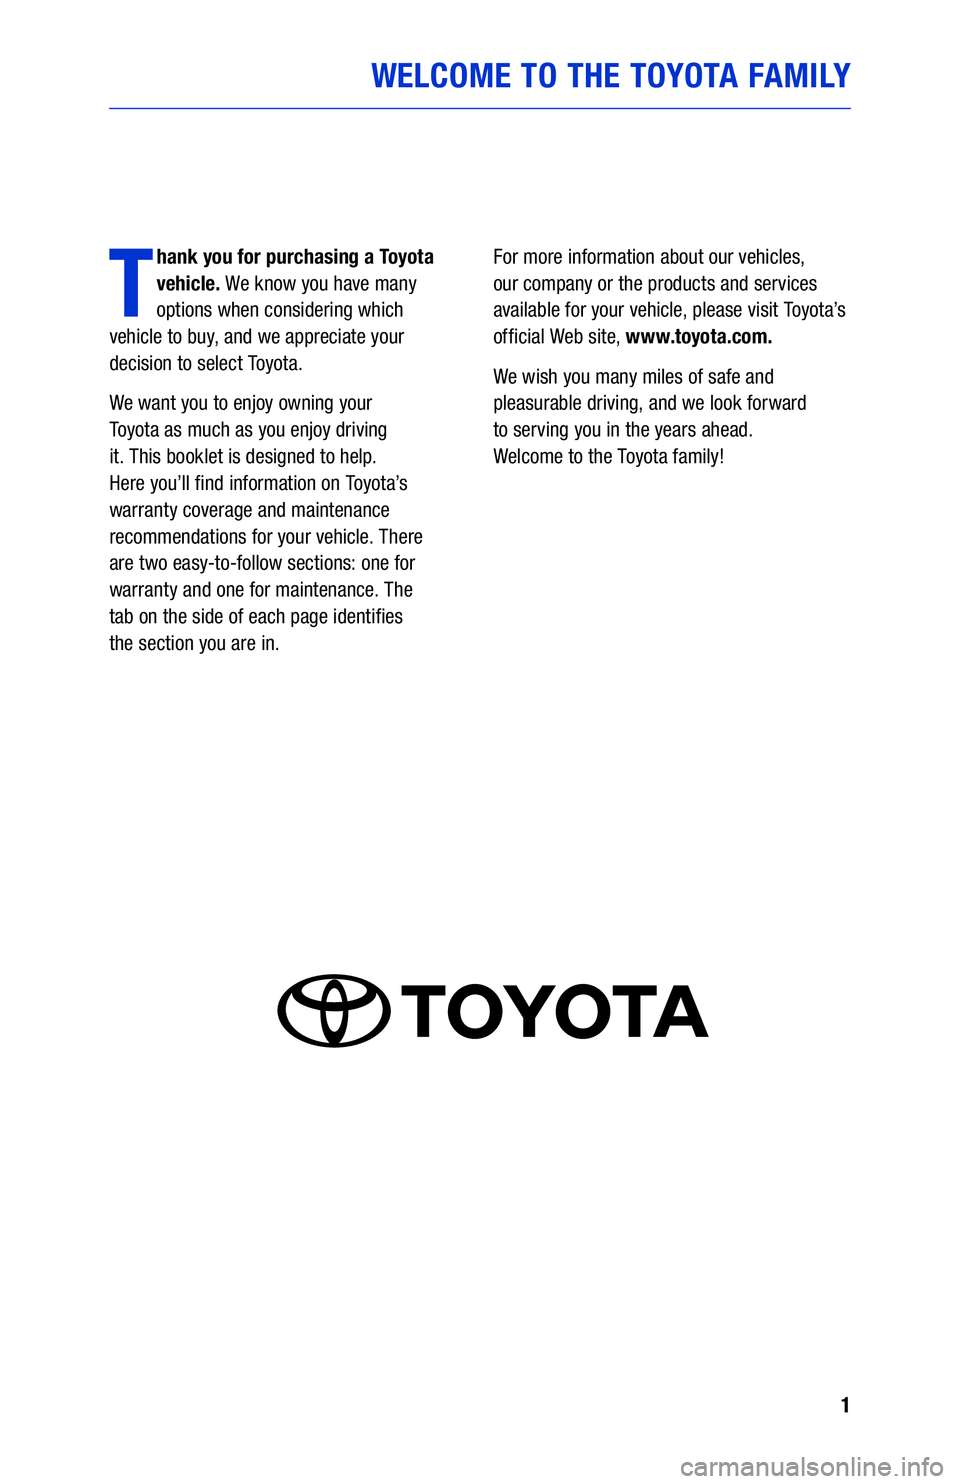 TOYOTA GT86 2019  Warranties & Maintenance Guides (in English) 1
WELCOME TO THE TOYOTA FAMILY
T
hank you for purchasing a Toyota 
vehicle. We know you have many 
options when considering which   
vehicle to buy, and we appreciate your 
decision to select Toyota.
